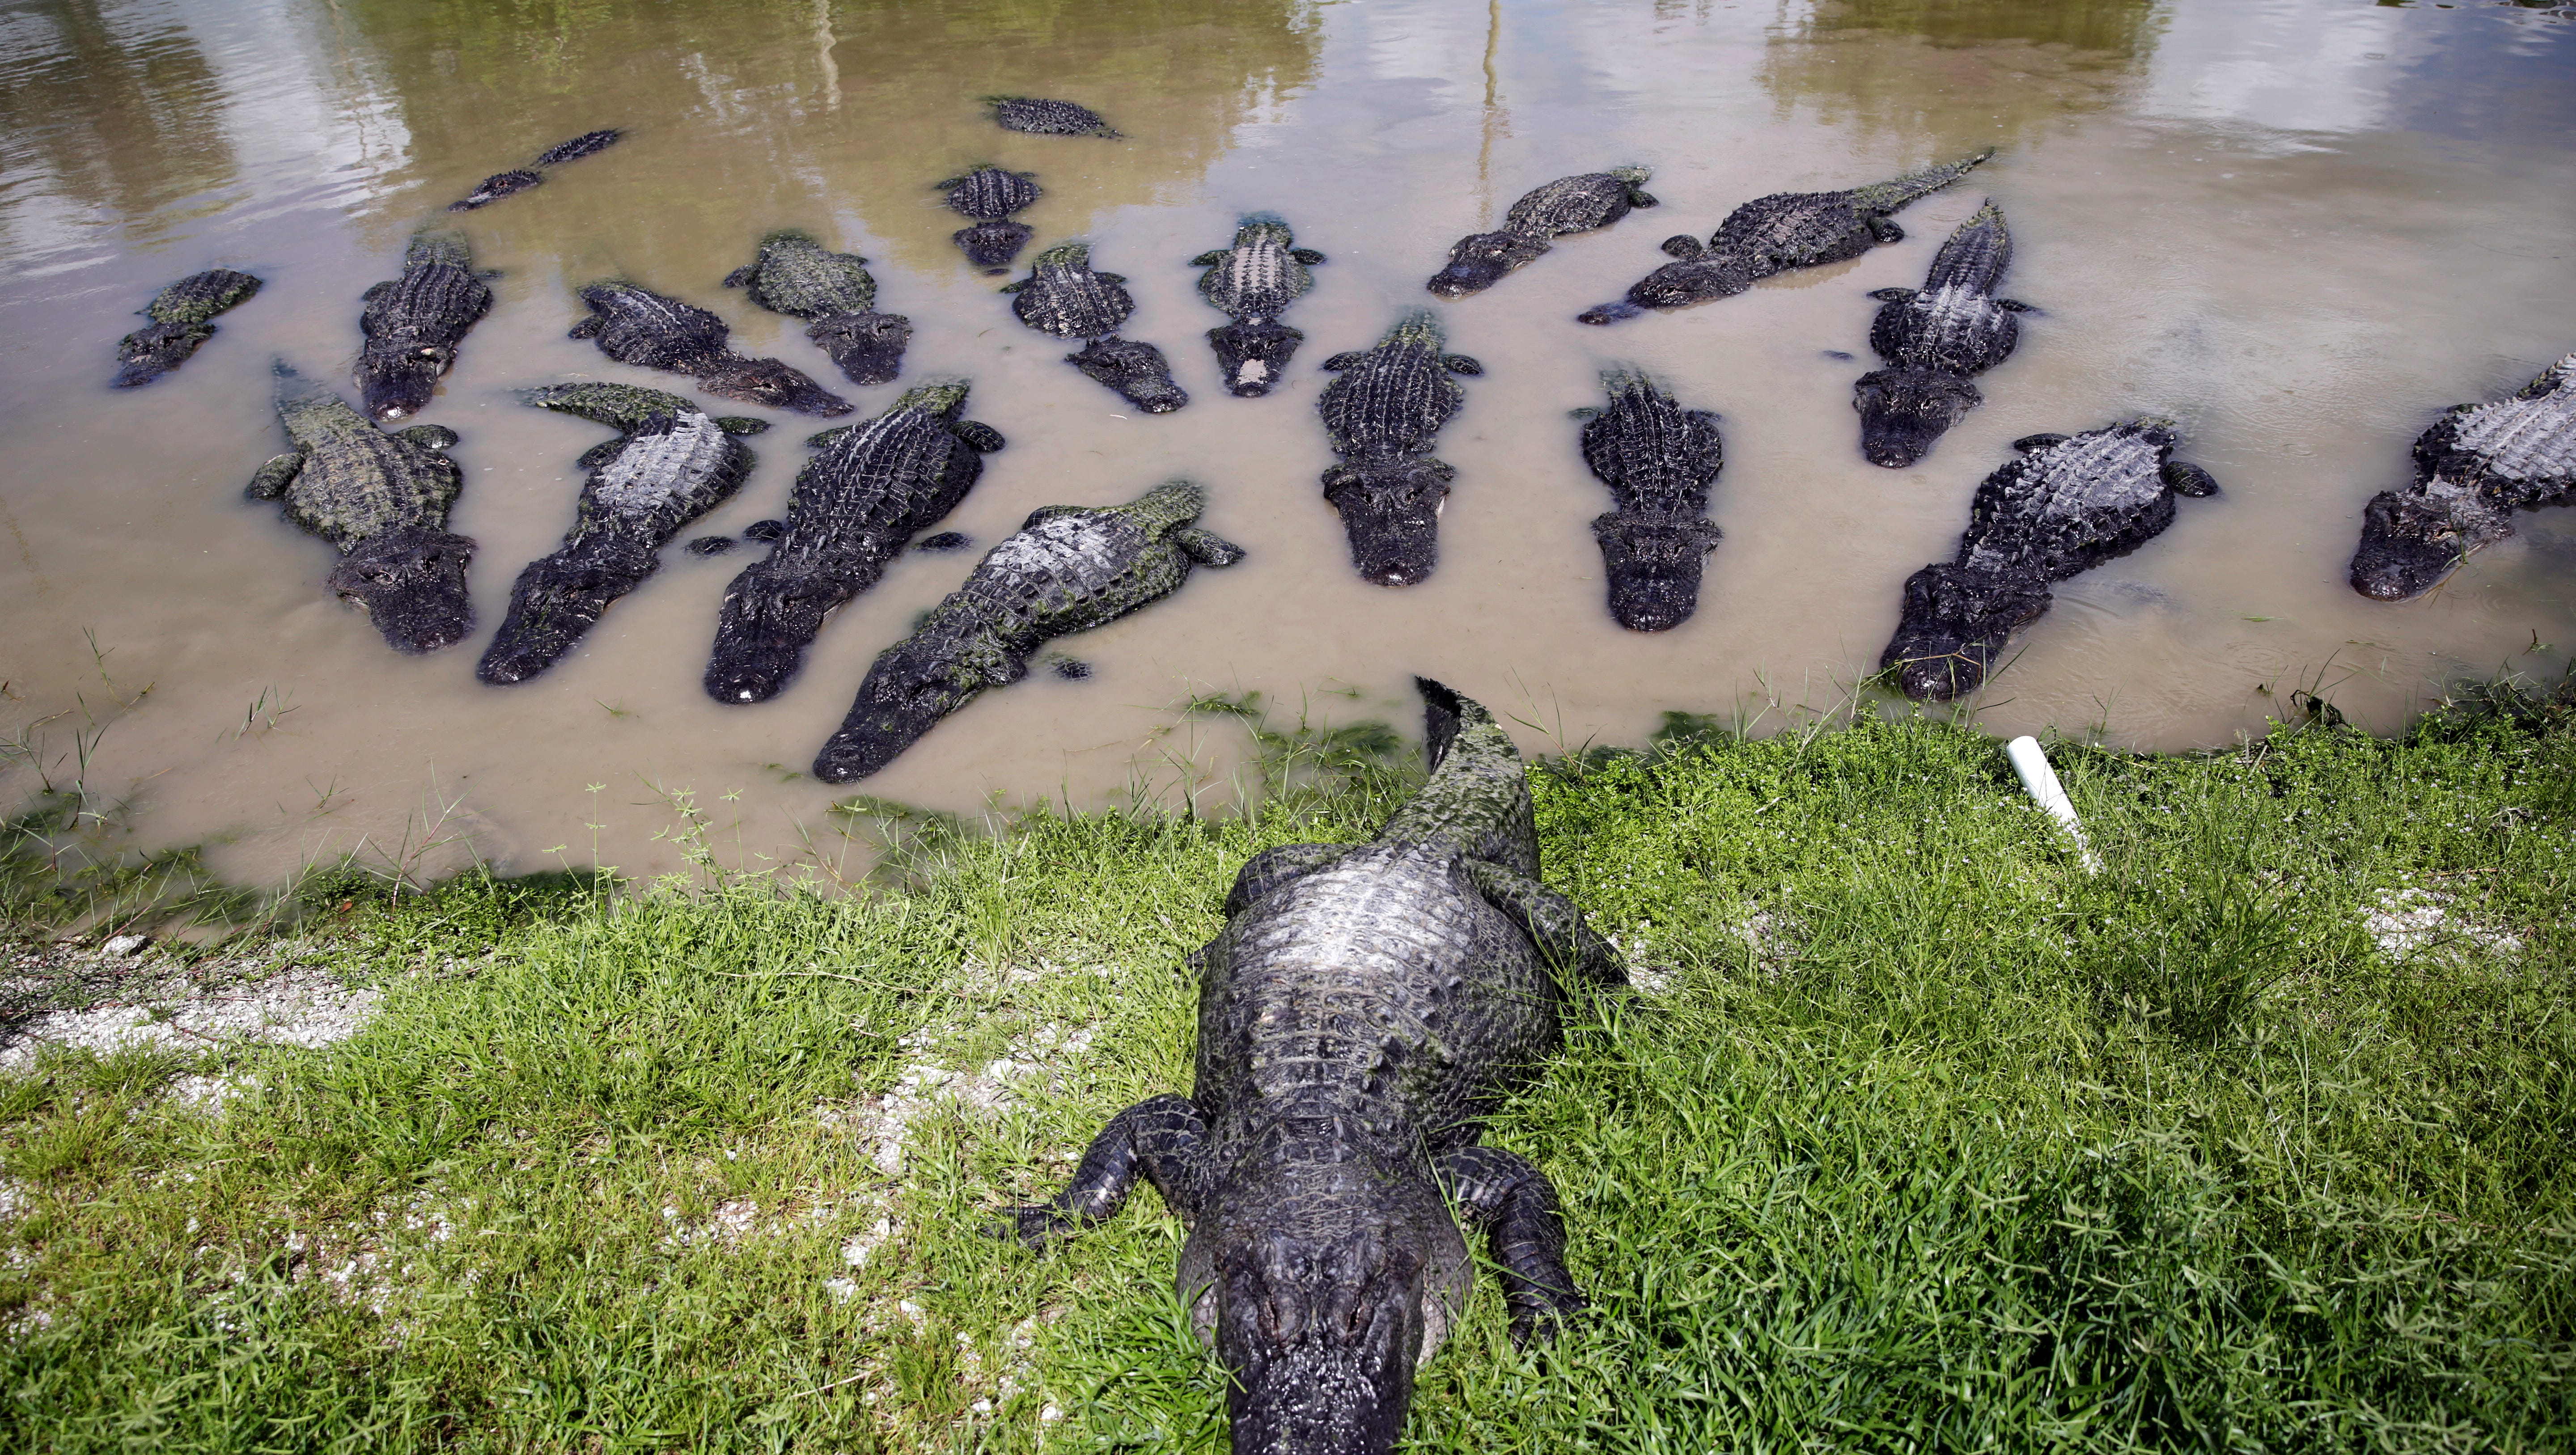 Where to See Alligators in Florida?